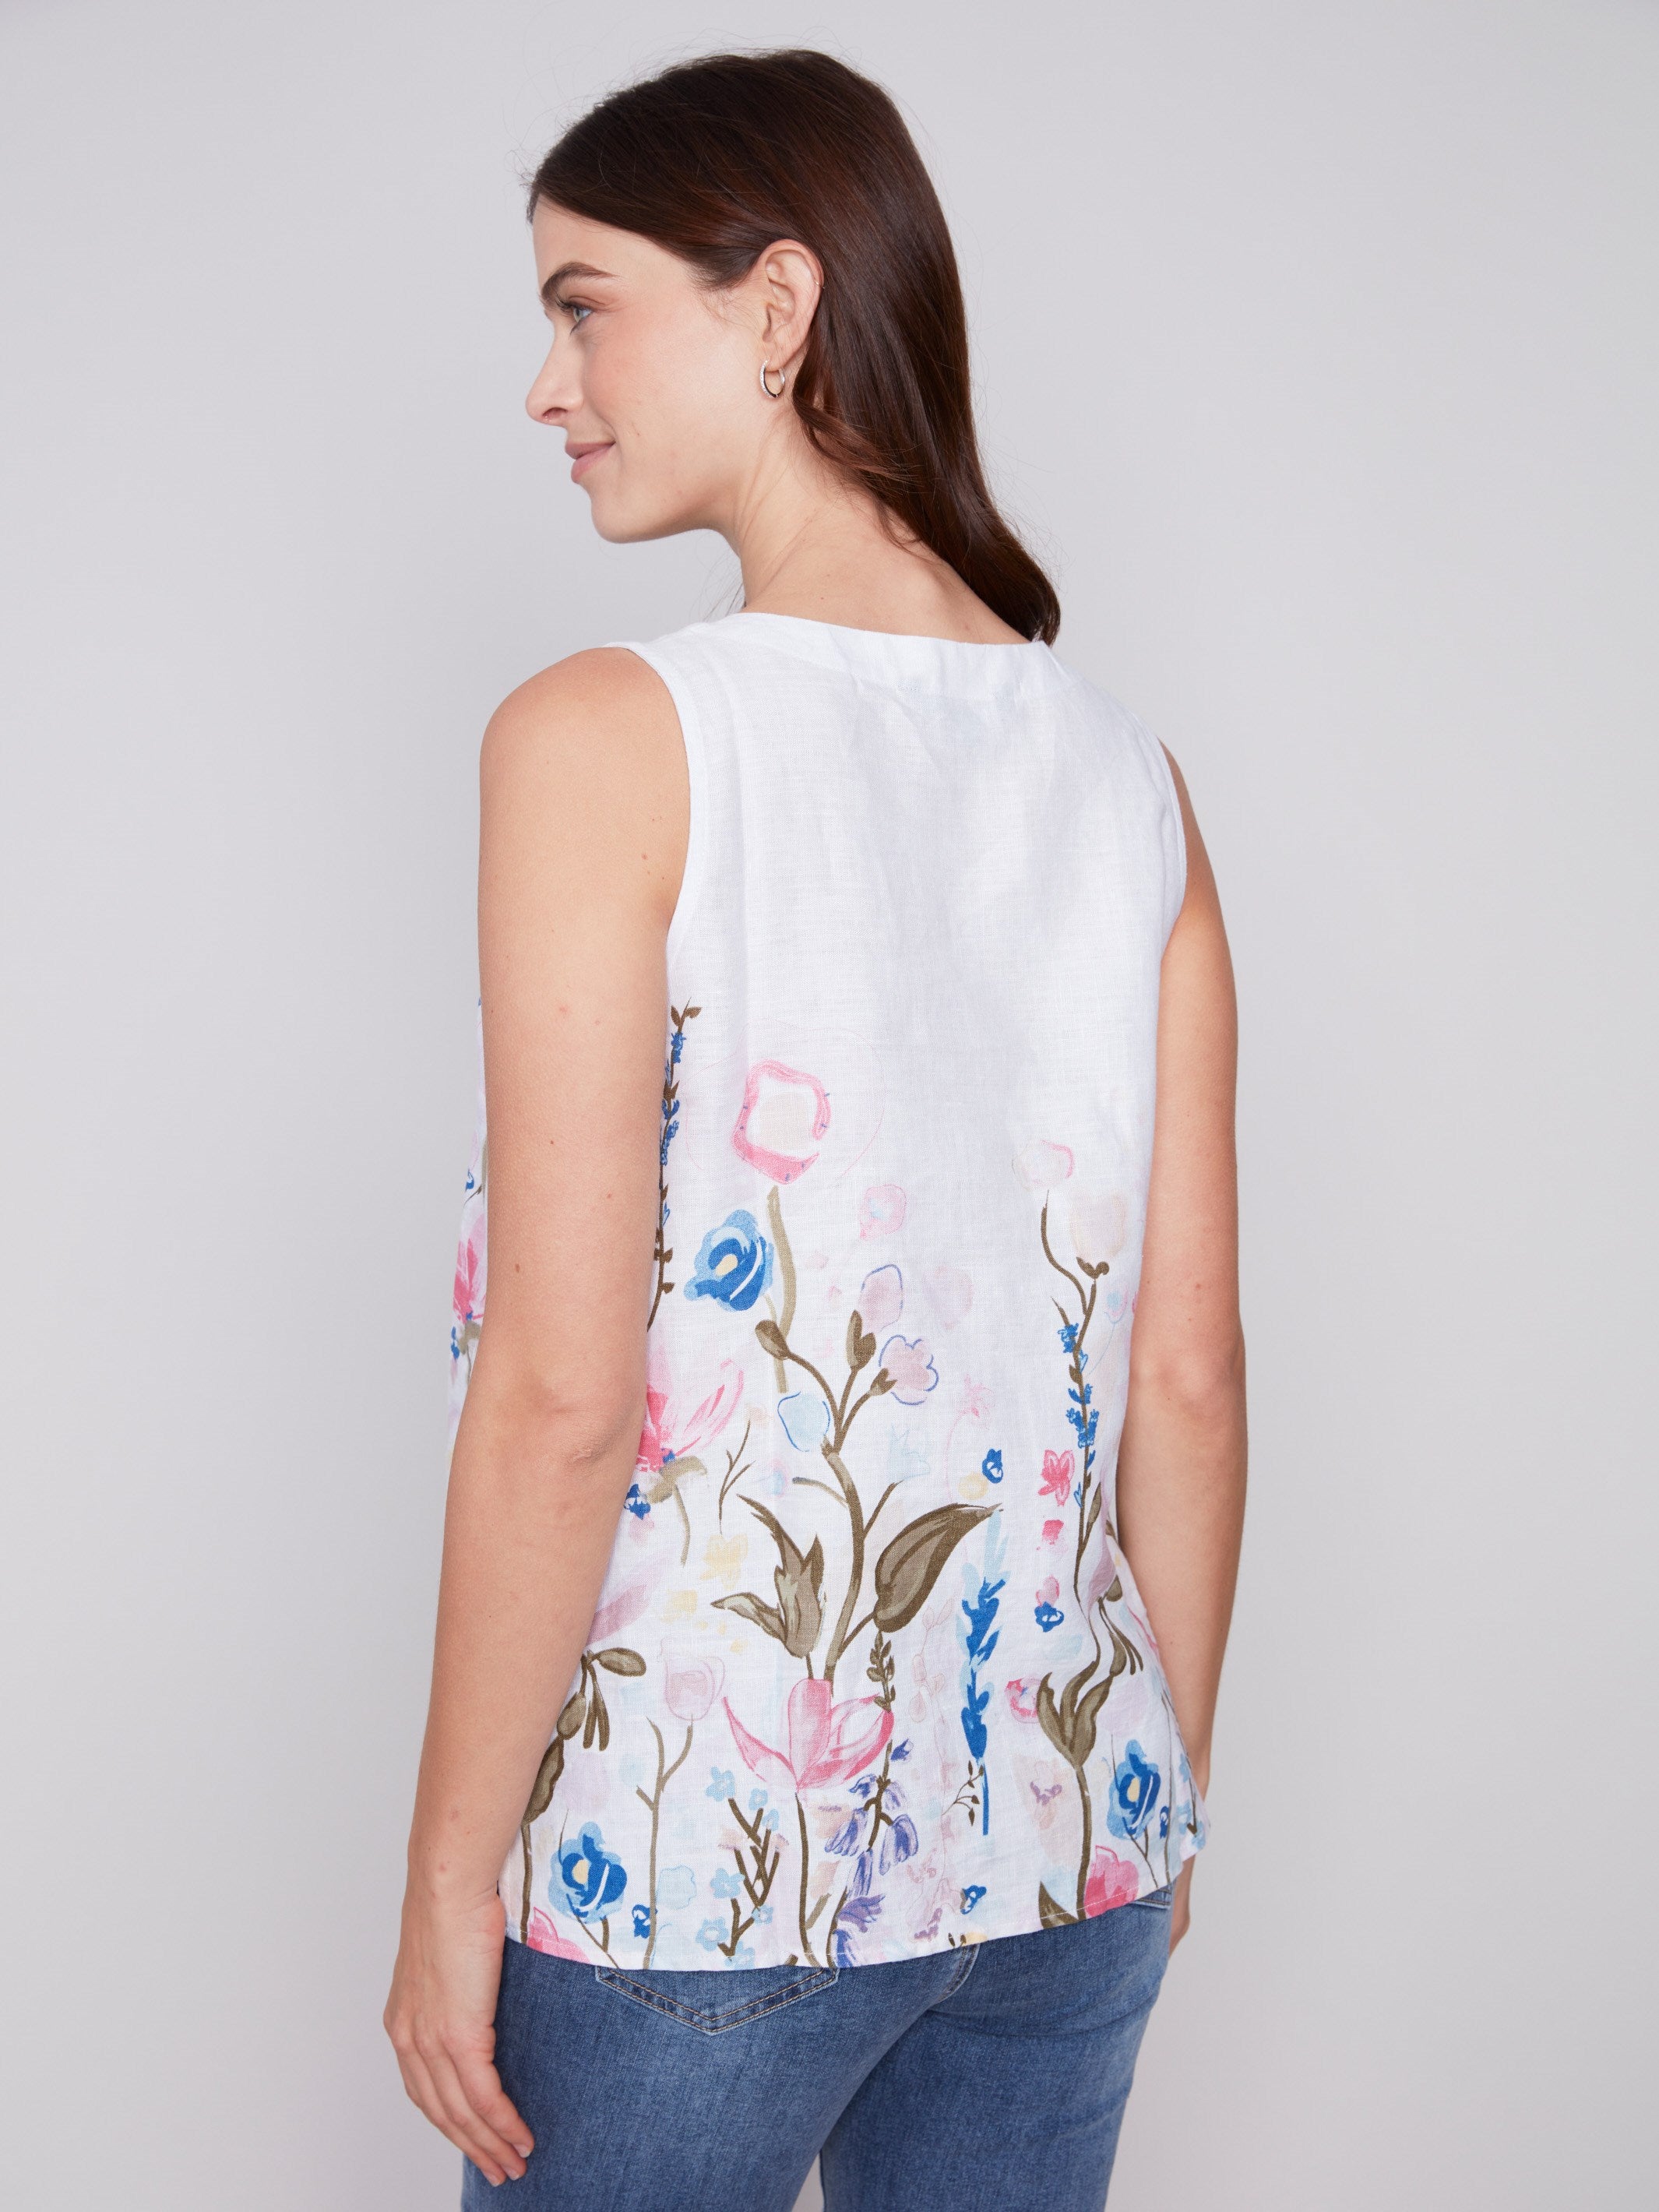 Charlie B Sleeveless Floral Printed Linen Top - Pastel - Image 2